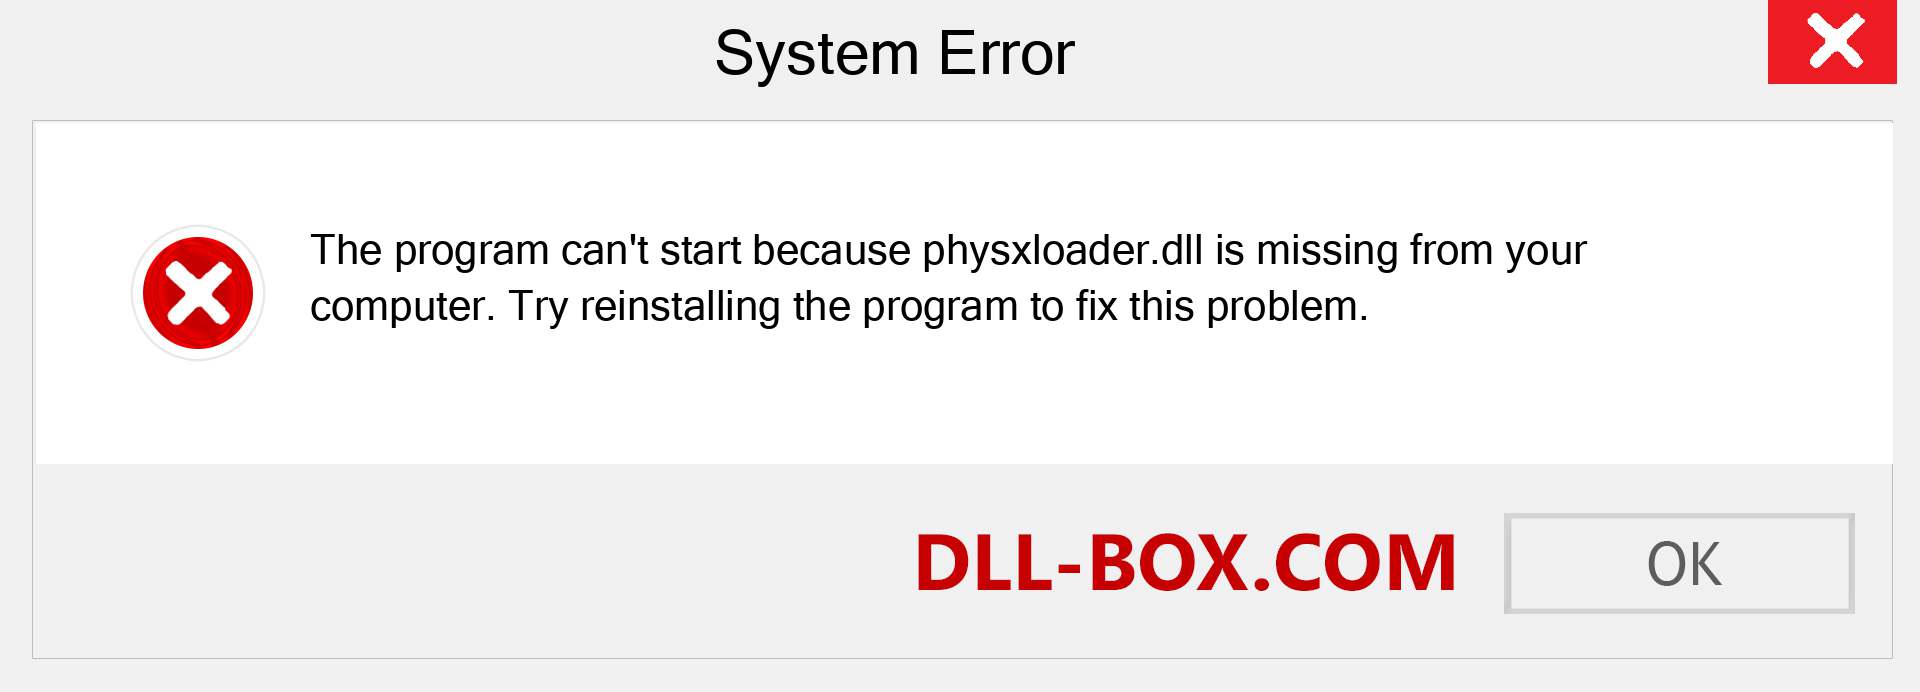  physxloader.dll file is missing?. Download for Windows 7, 8, 10 - Fix  physxloader dll Missing Error on Windows, photos, images